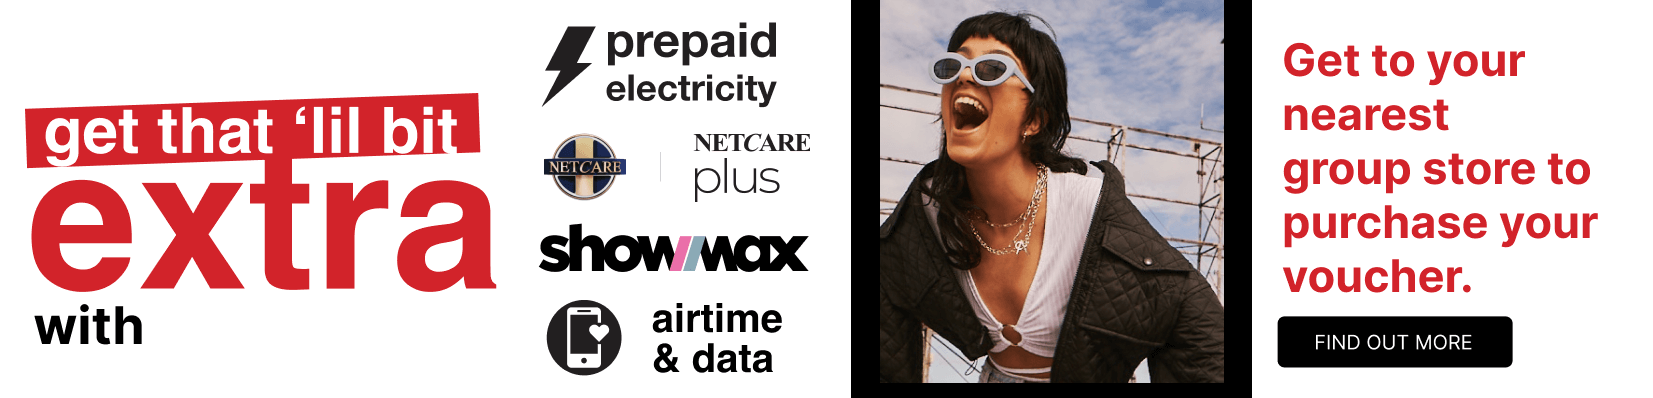 Mr Price Extras - Showmax, Netcare Plus, Buy Electricity and Airtime